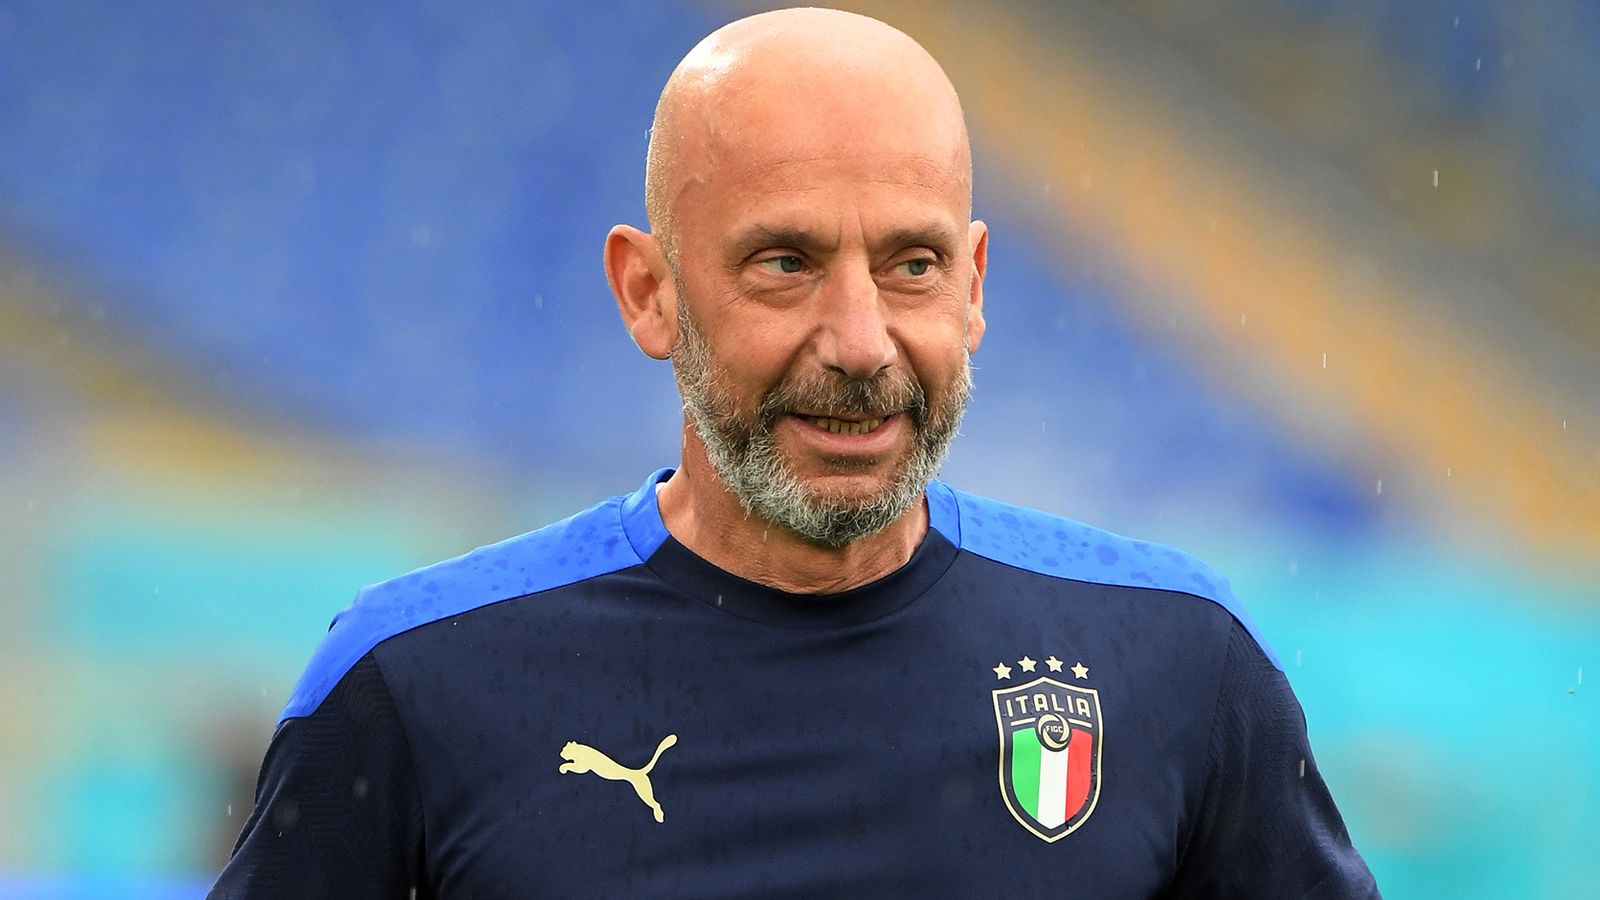 Former Chelsea player and manager Gianluca Vialli dies aged 58